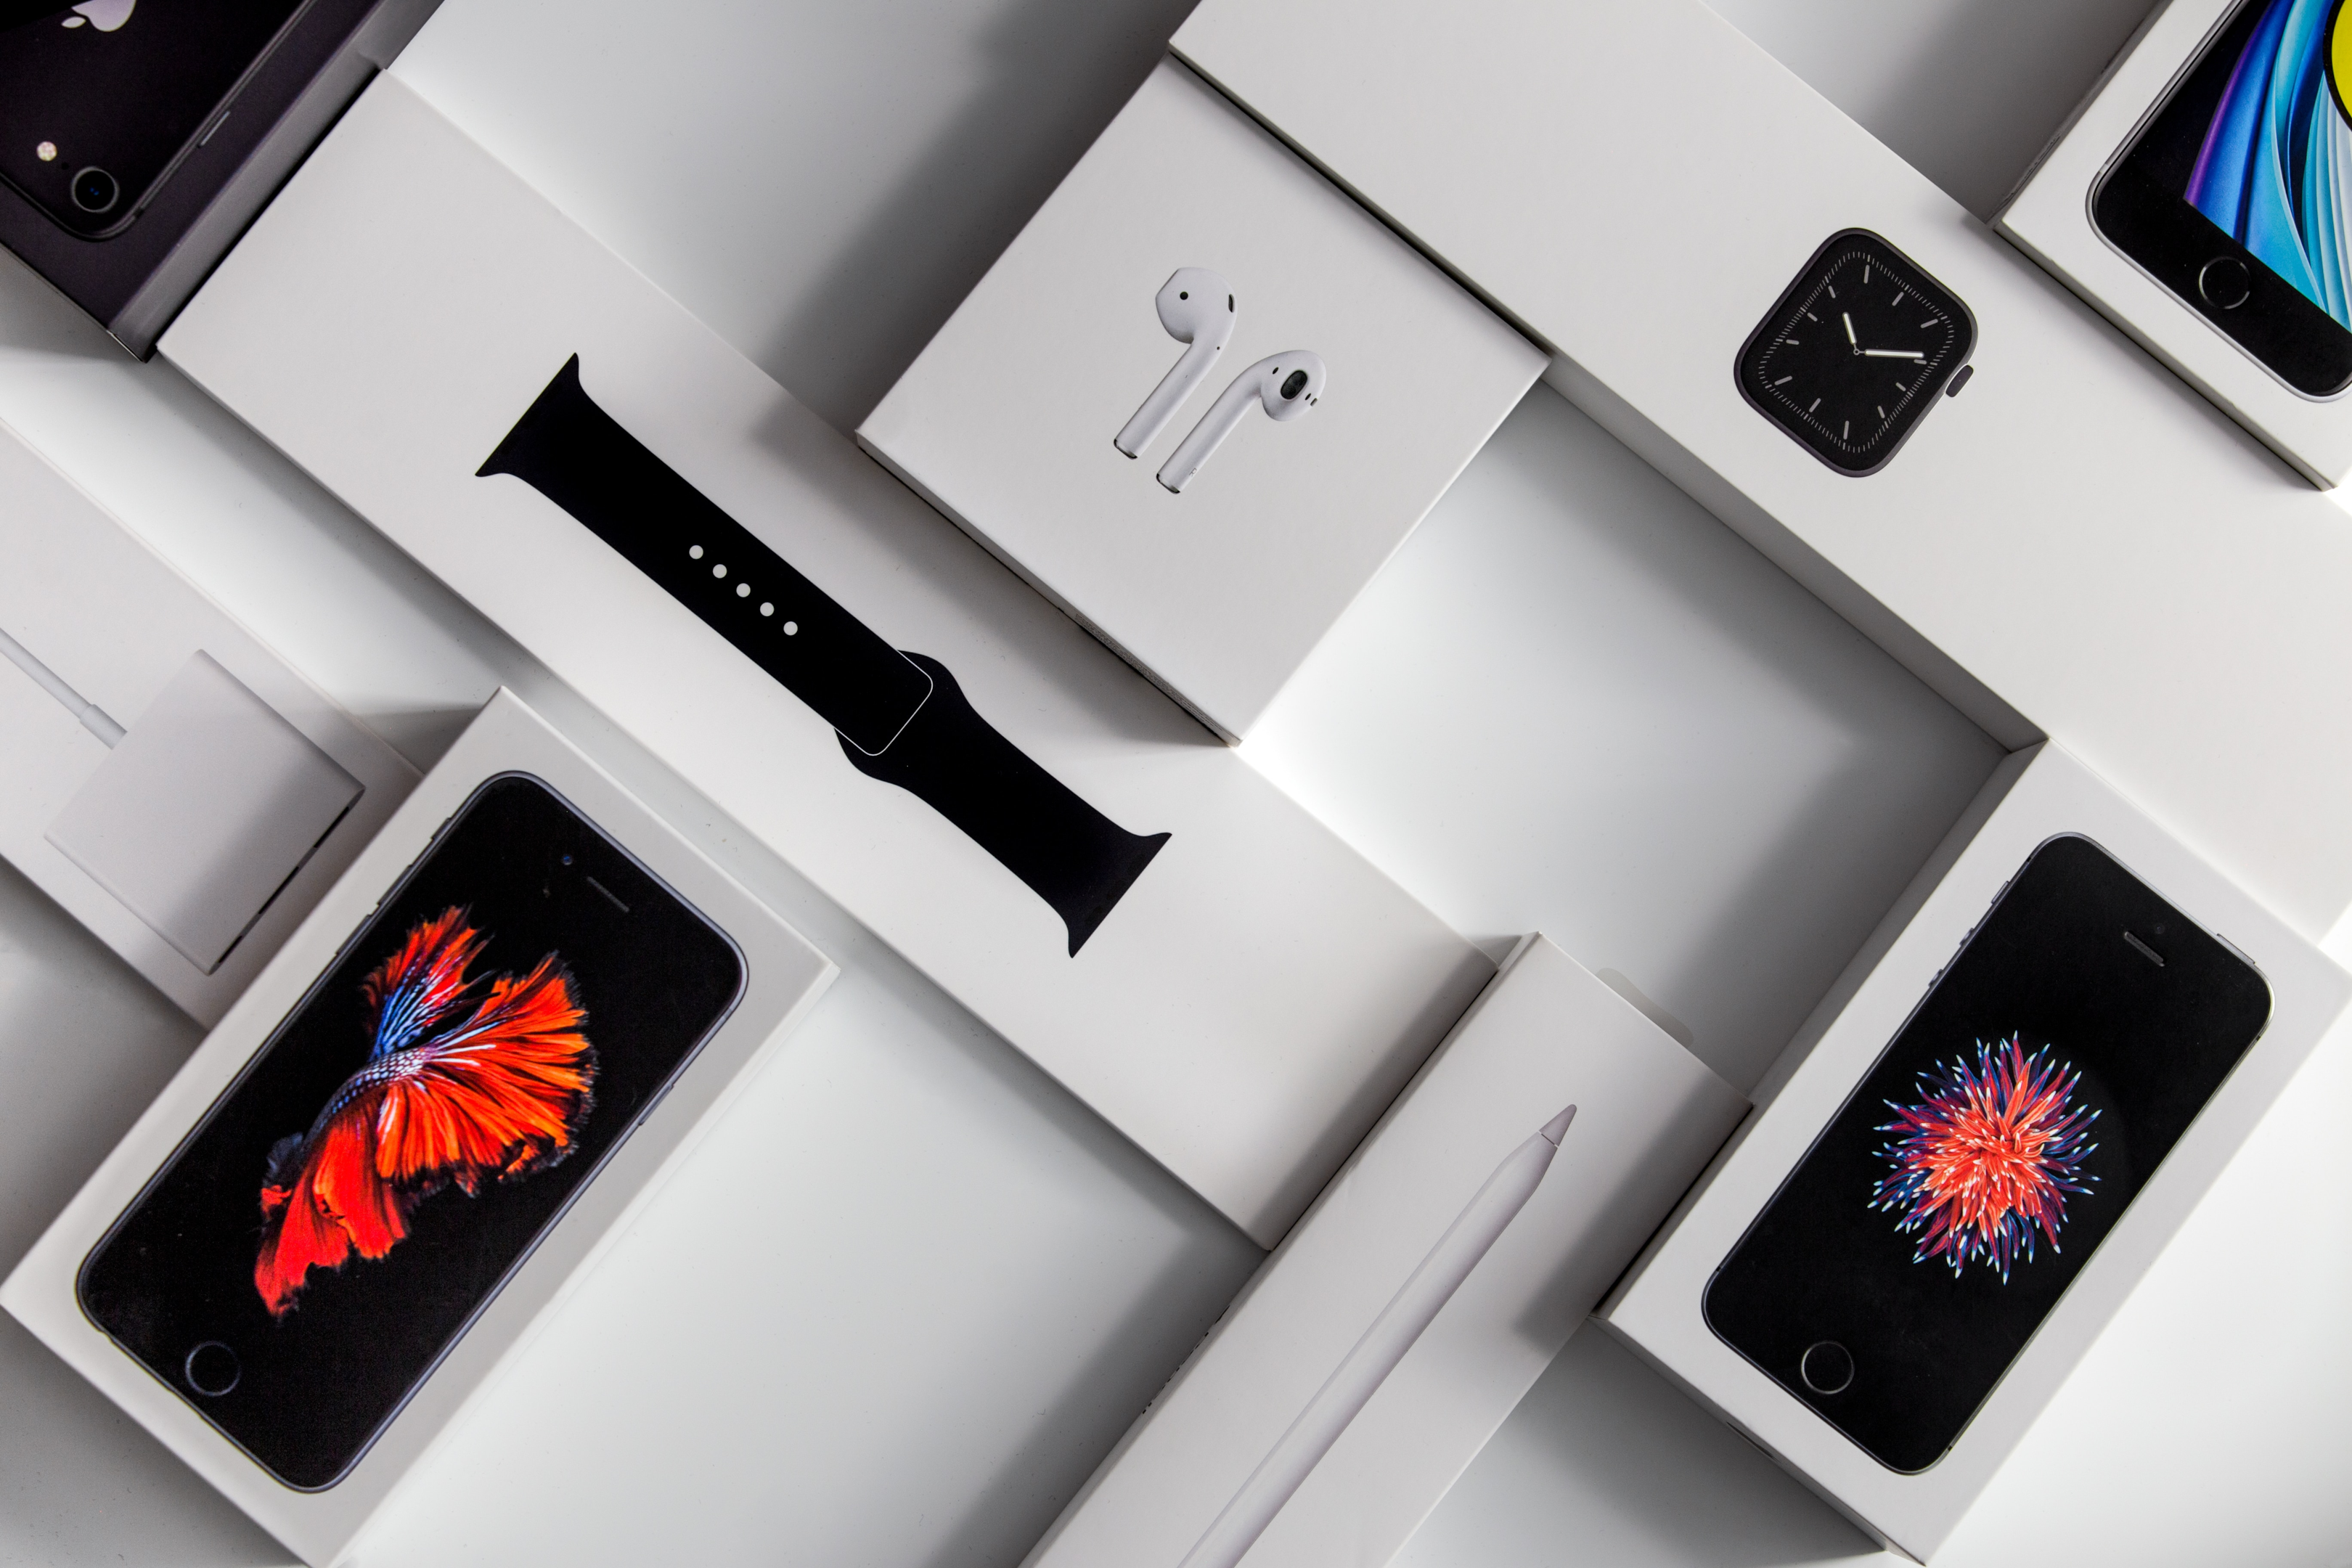 Apple sets high prices due to its strong brand reputation.